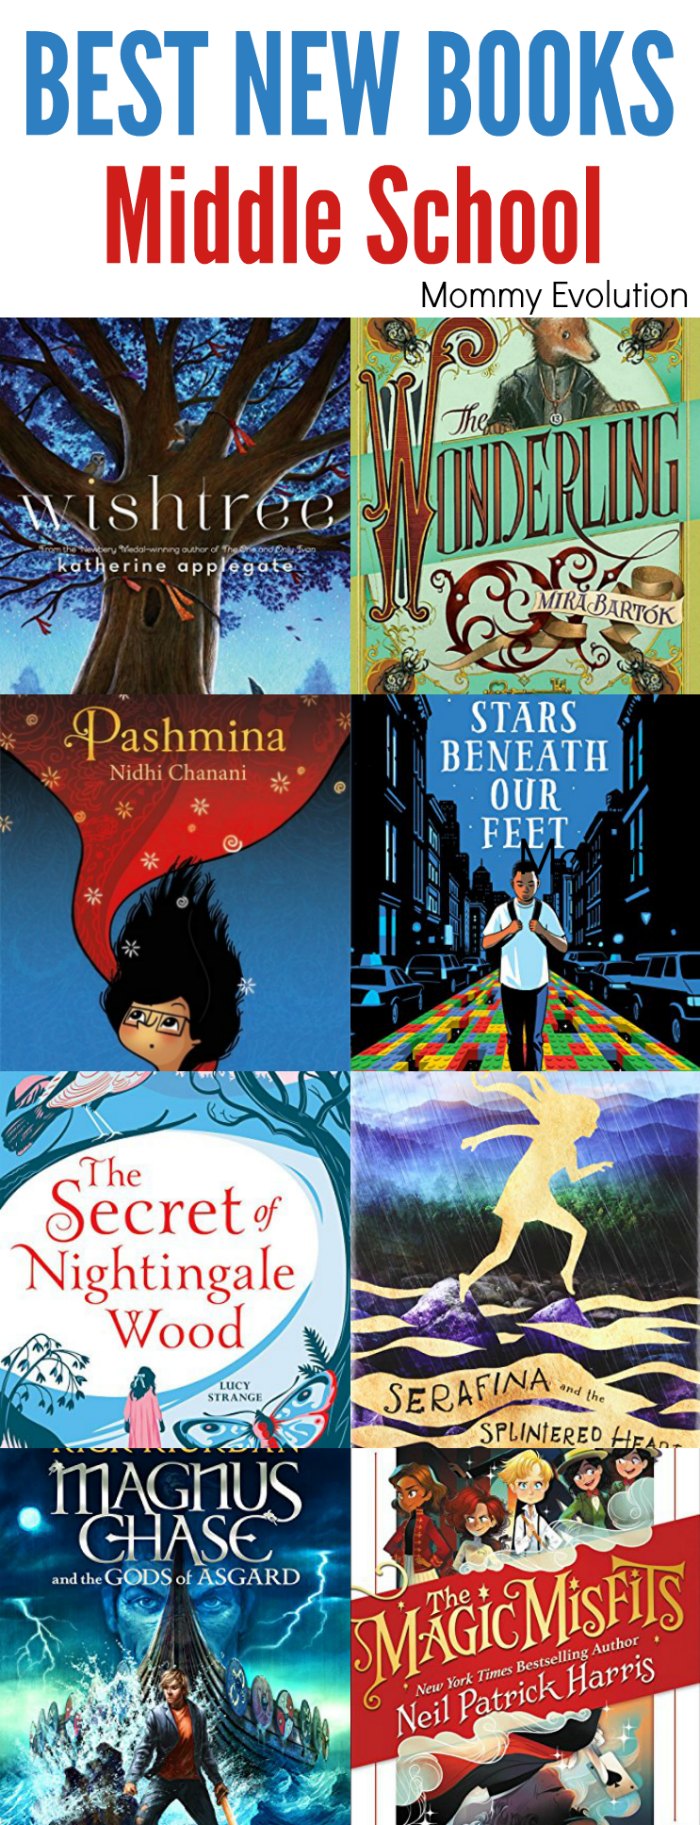 BEST NEW MIDDLE SCHOOL BOOKS TO READ THIS YEAR - For kids ages 9-12 | Mommy Evolution #kidlit #chapterbooks #reading #middleschool #books